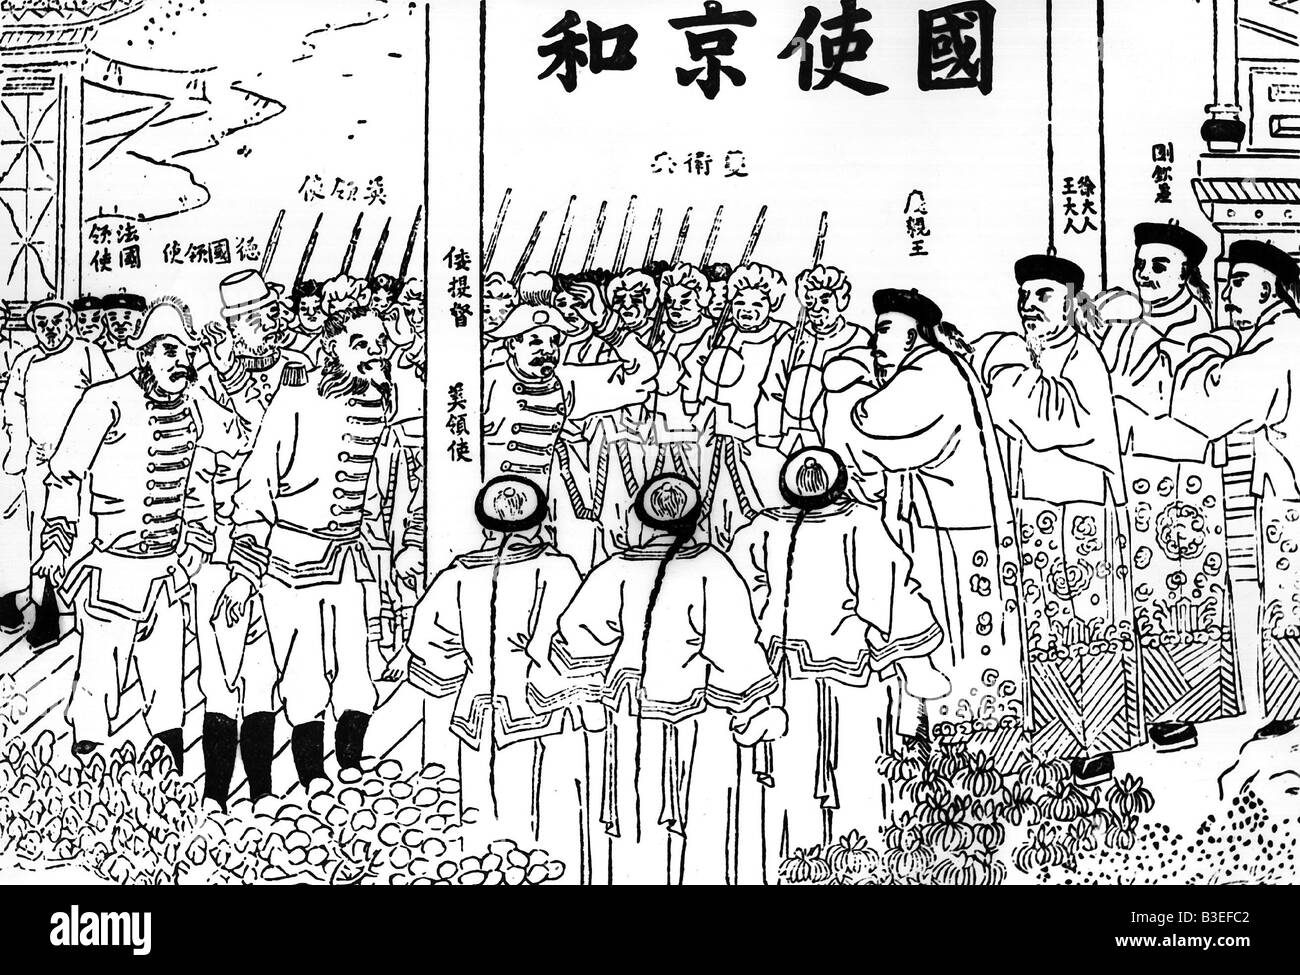 geography / travel, China, Boxer Rebellion 1900, envoy from Europe asking for armistice, Chinese newspaper, 1900, Asia, historic, historical, war, Beijing, colonialism, colonial, stopping fights, male, man, men, people, 20th century, 1900s, Stock Photo